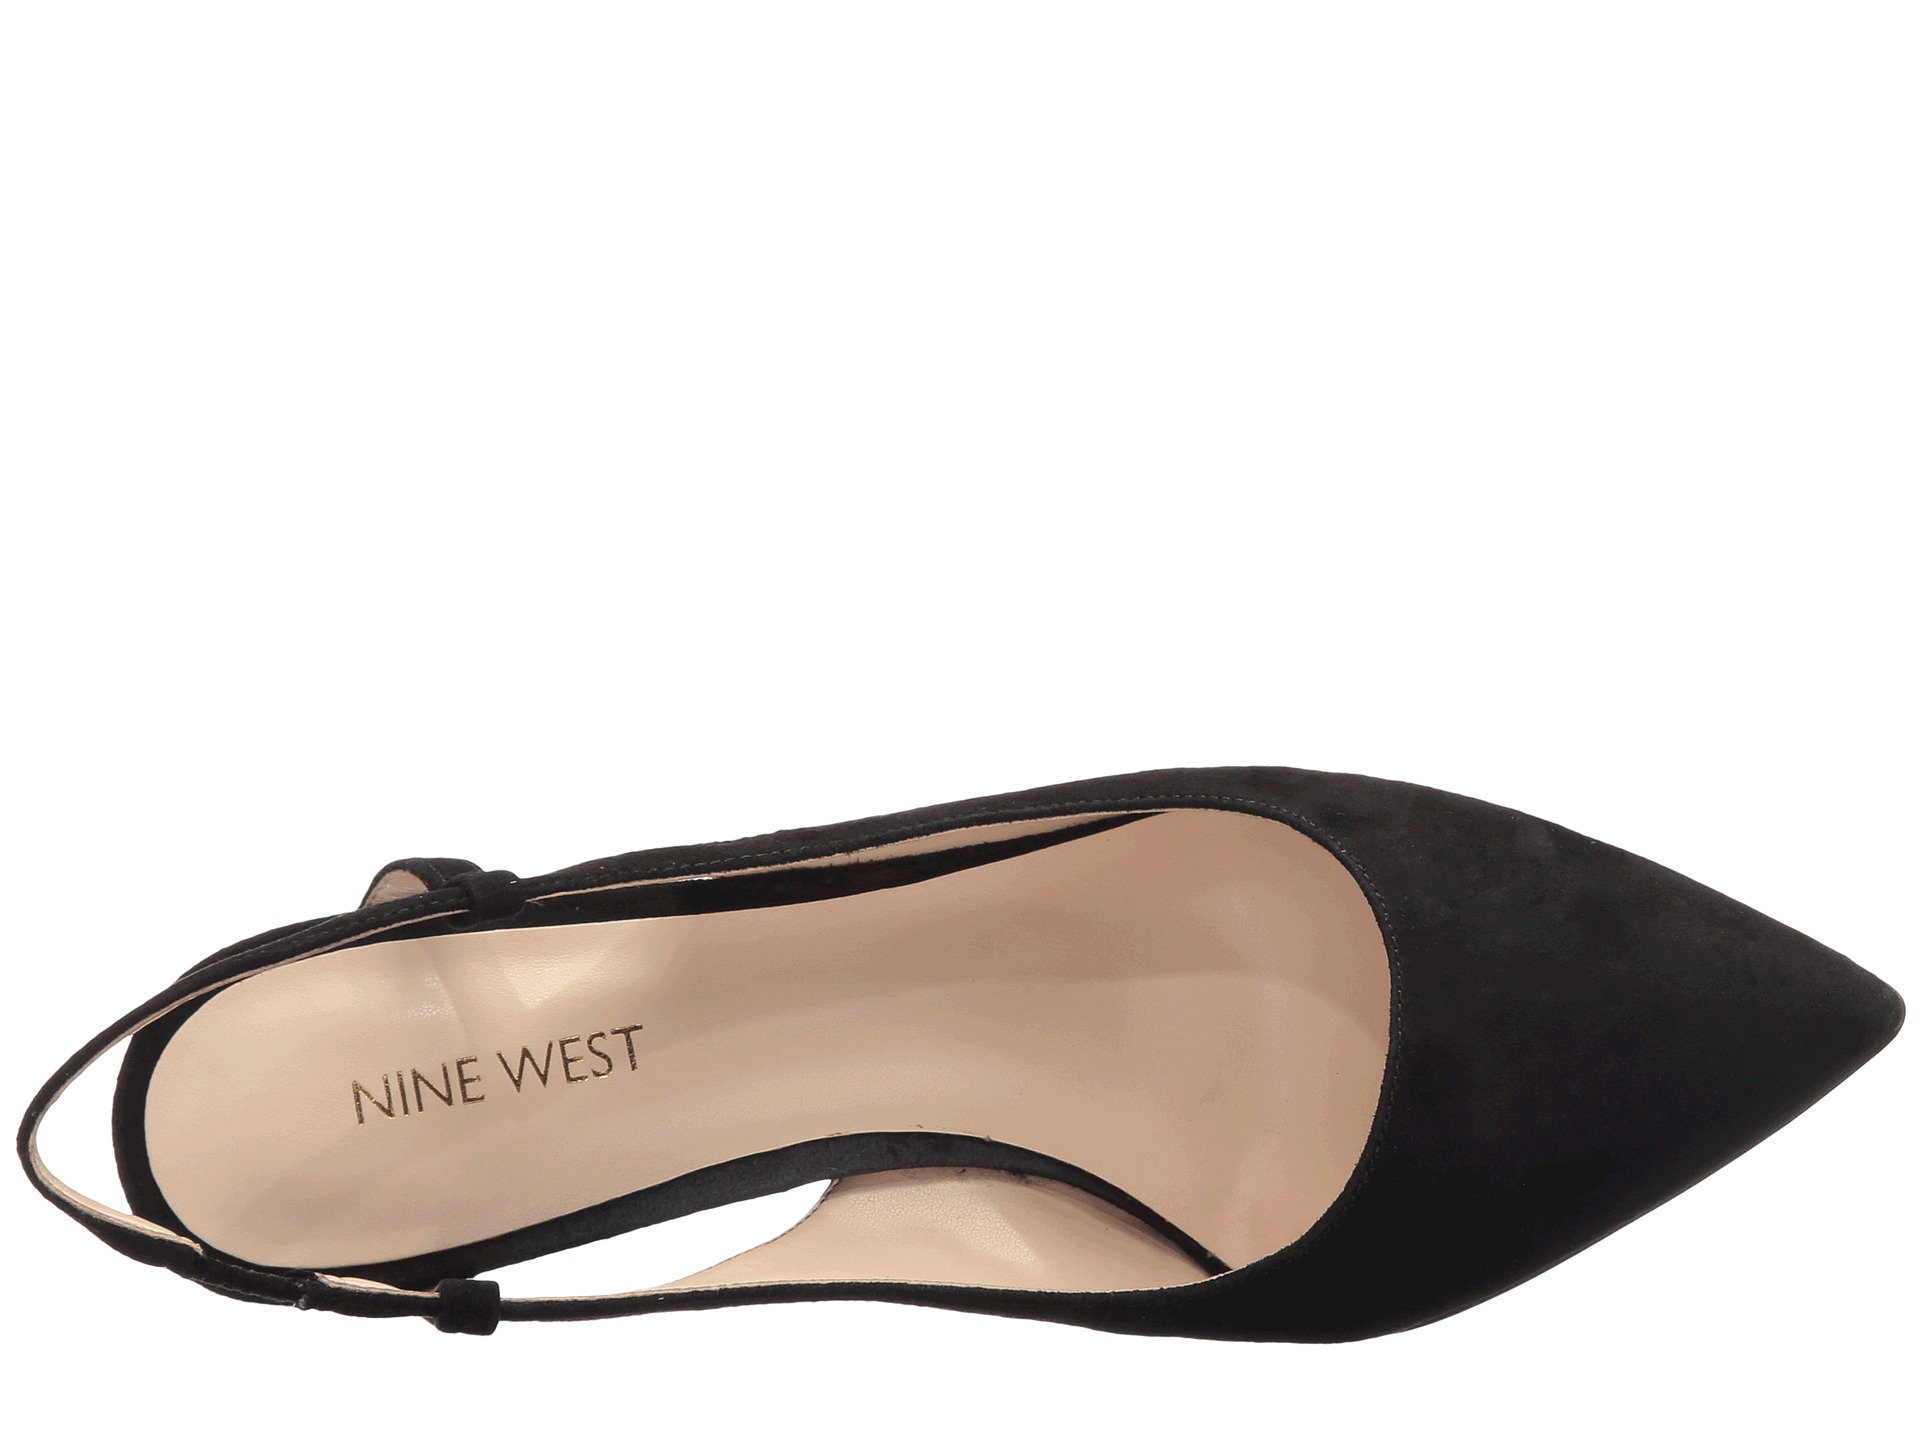 Nine West Tarly Black Suede - Zappos.com Free Shipping BOTH Ways